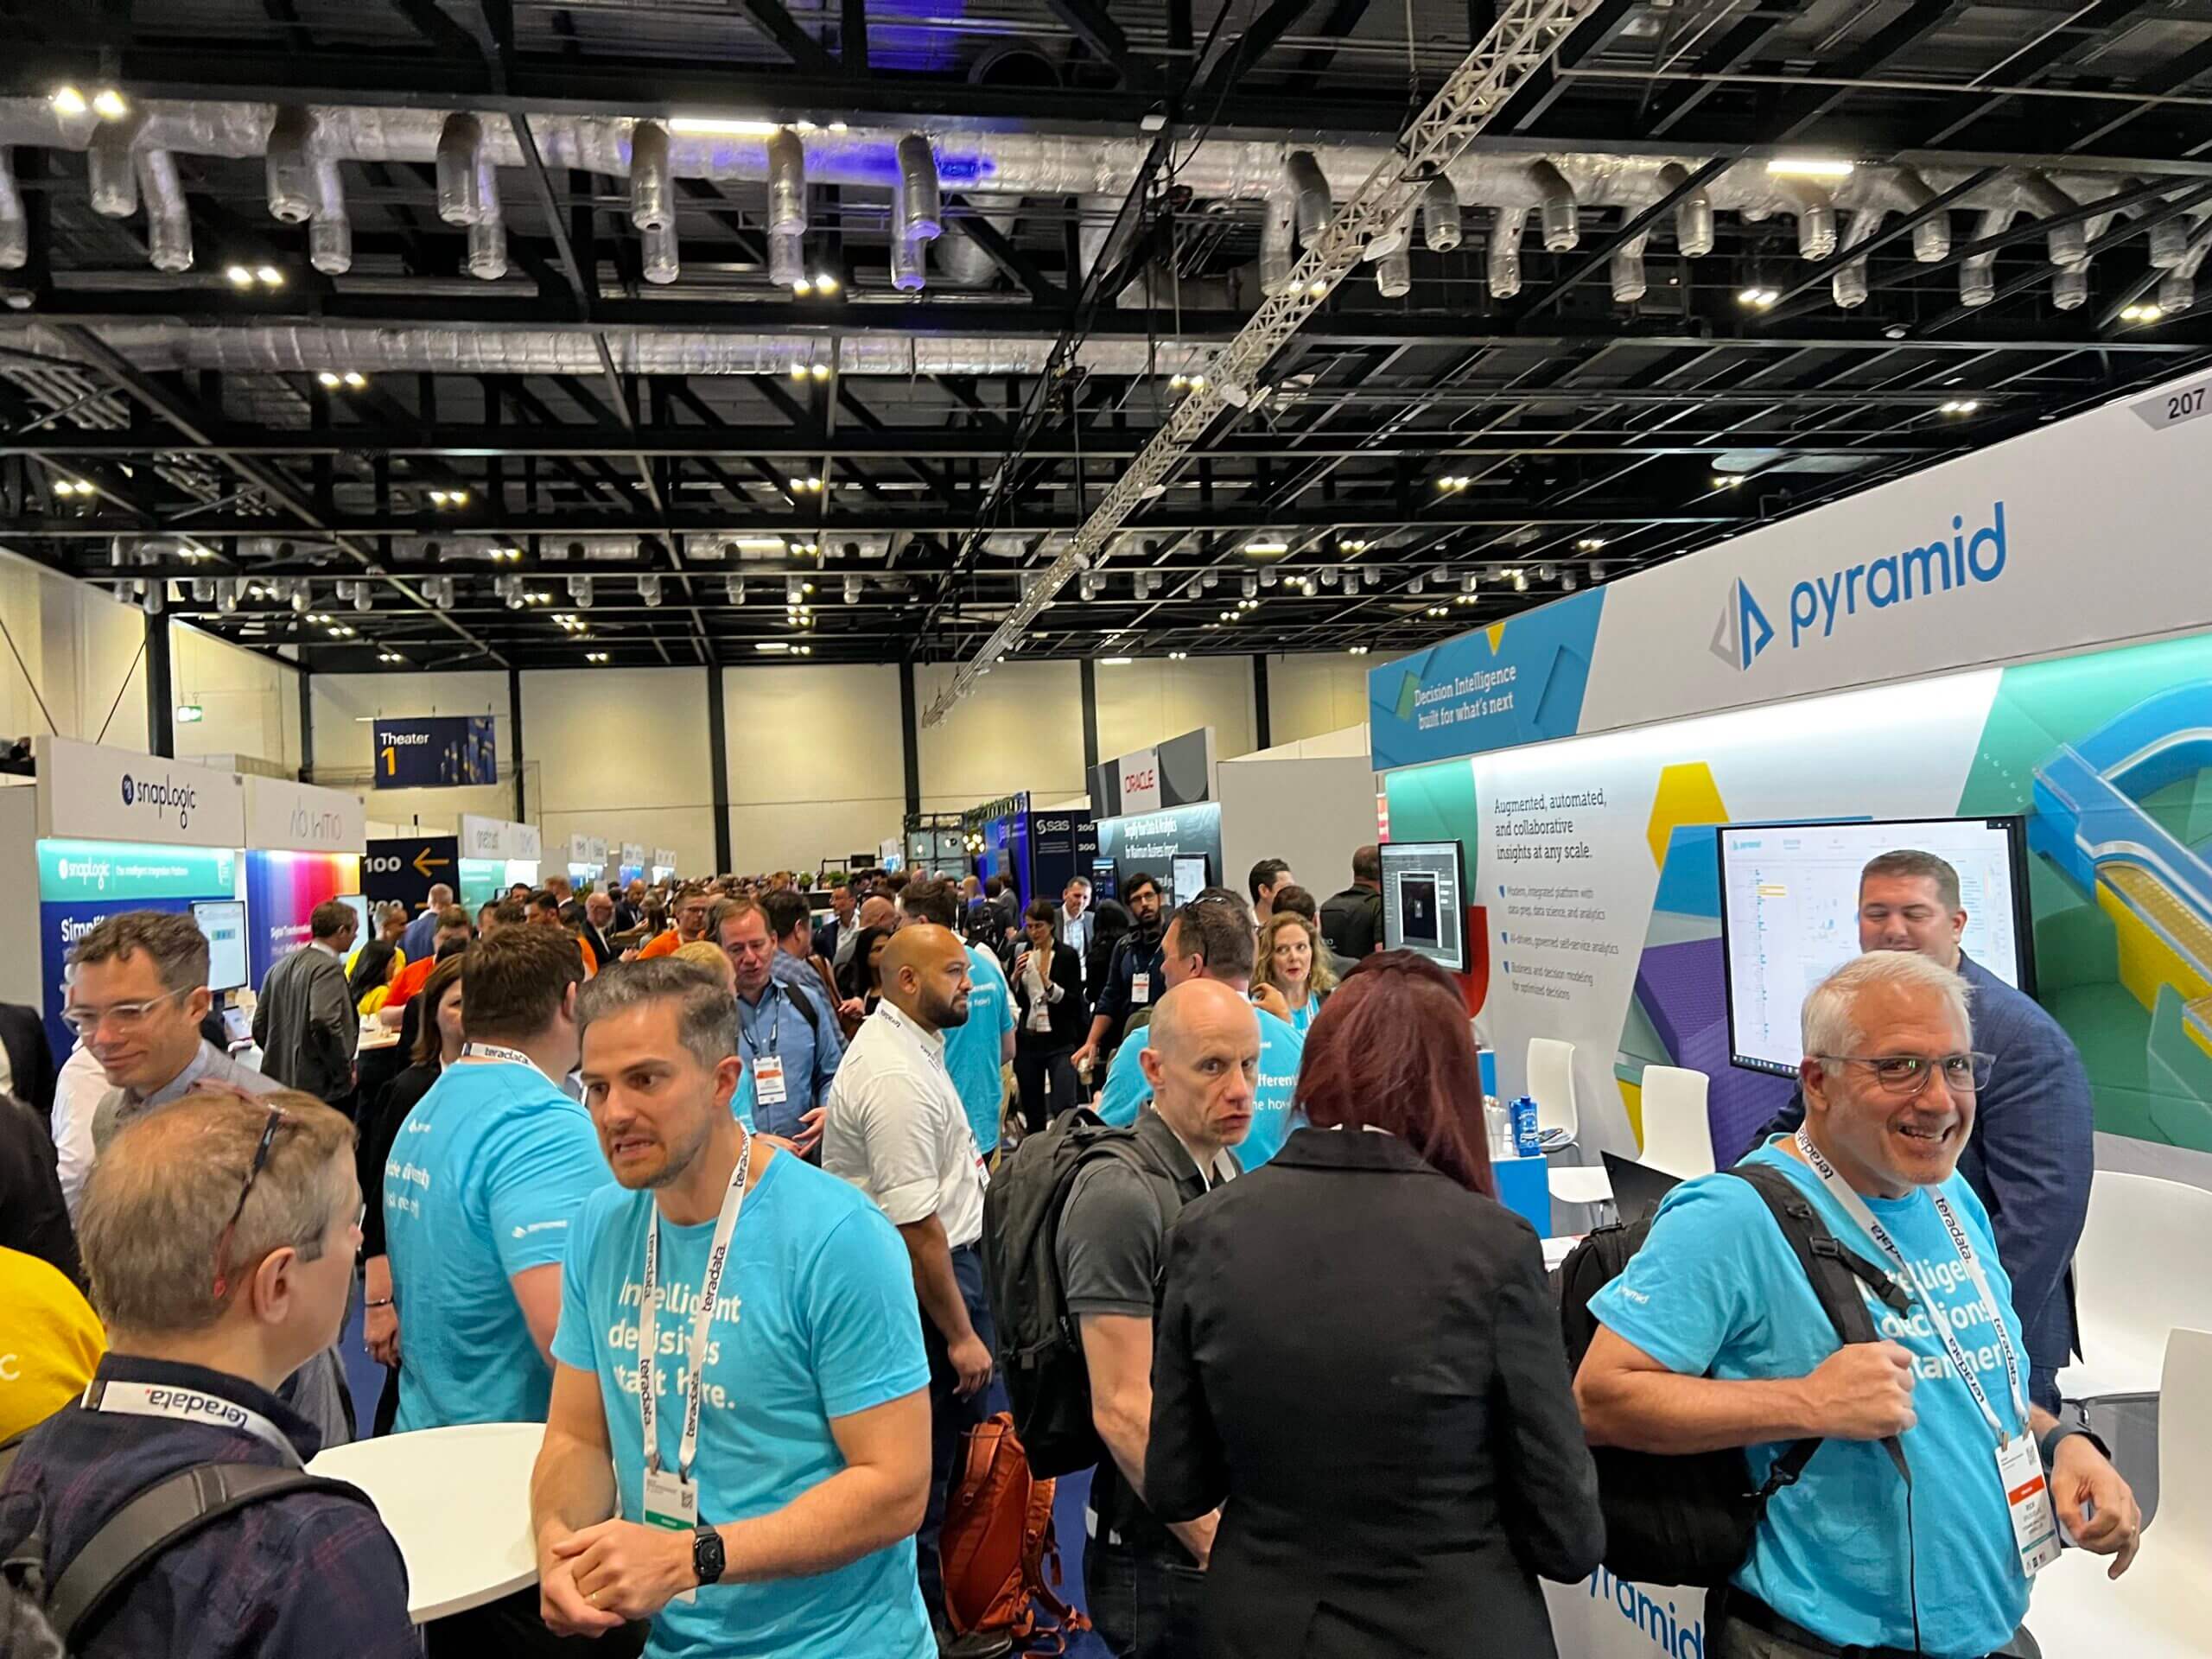 Busy at the Pyramid Analytics stand.